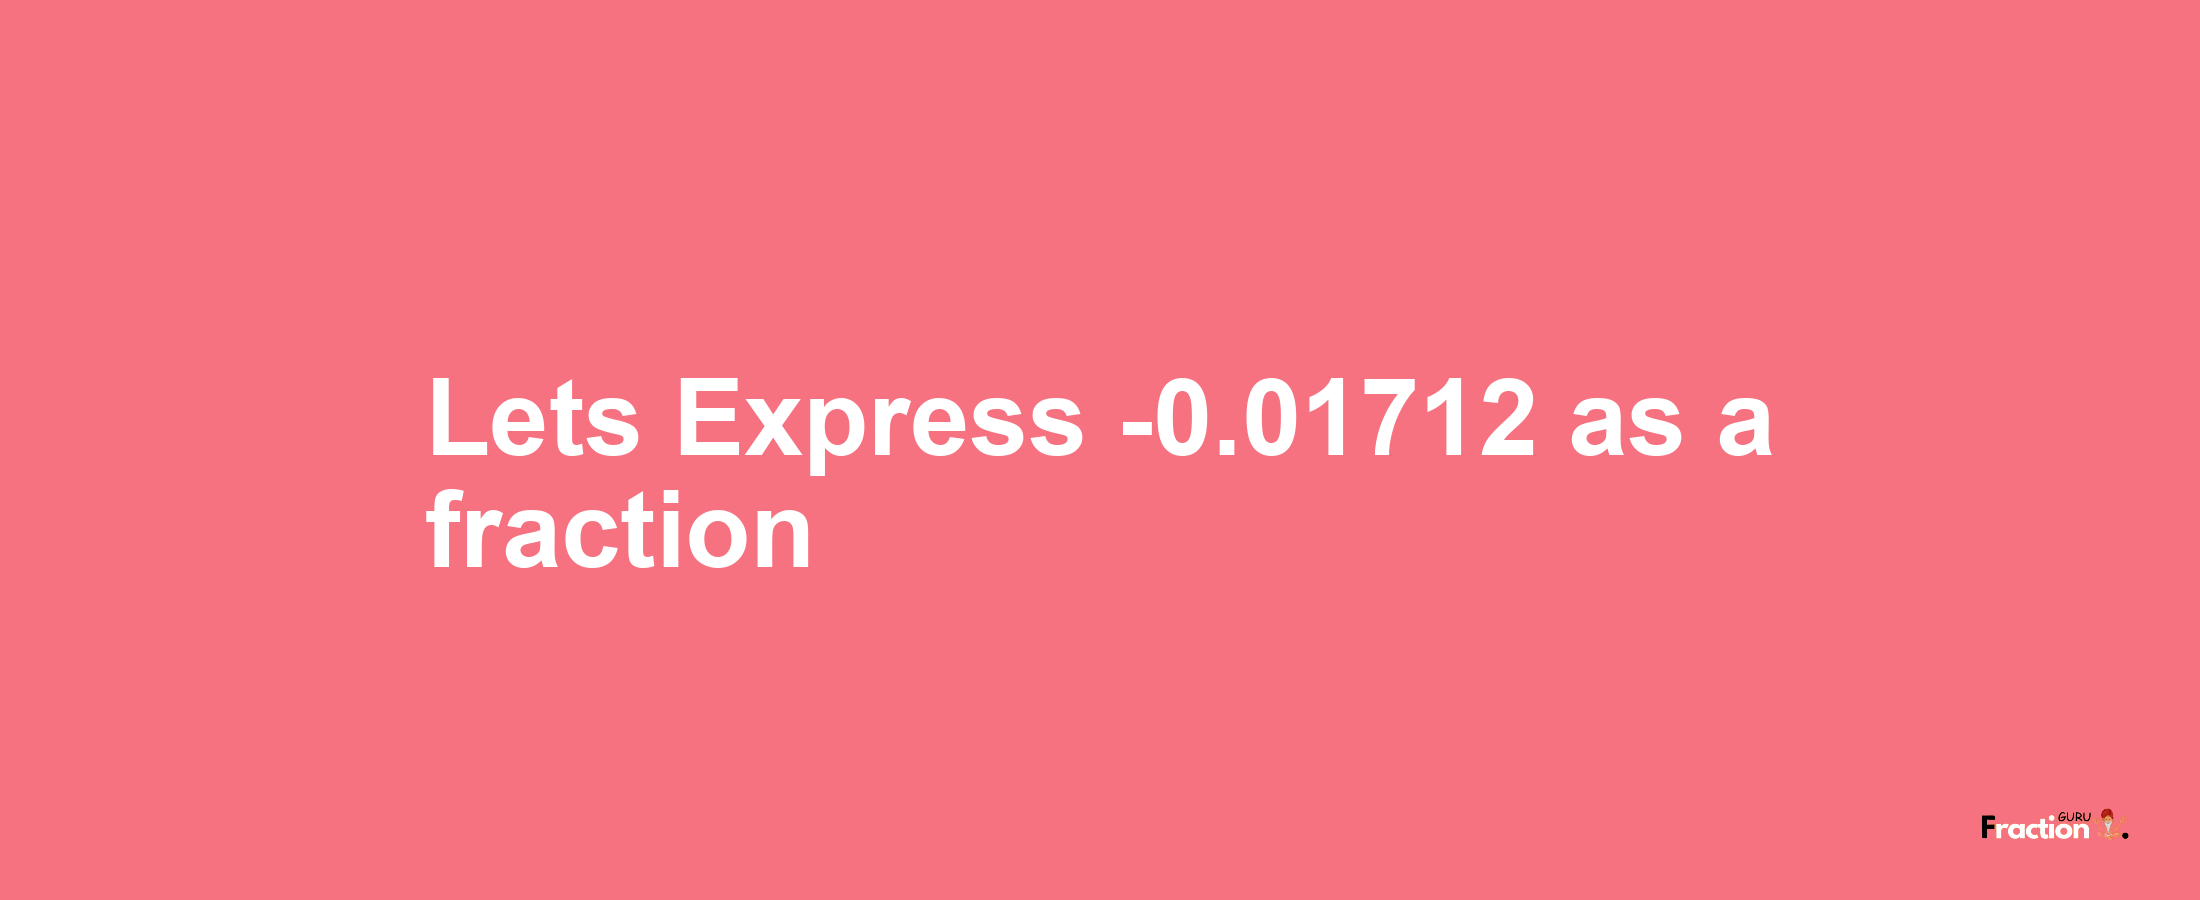 Lets Express -0.01712 as afraction